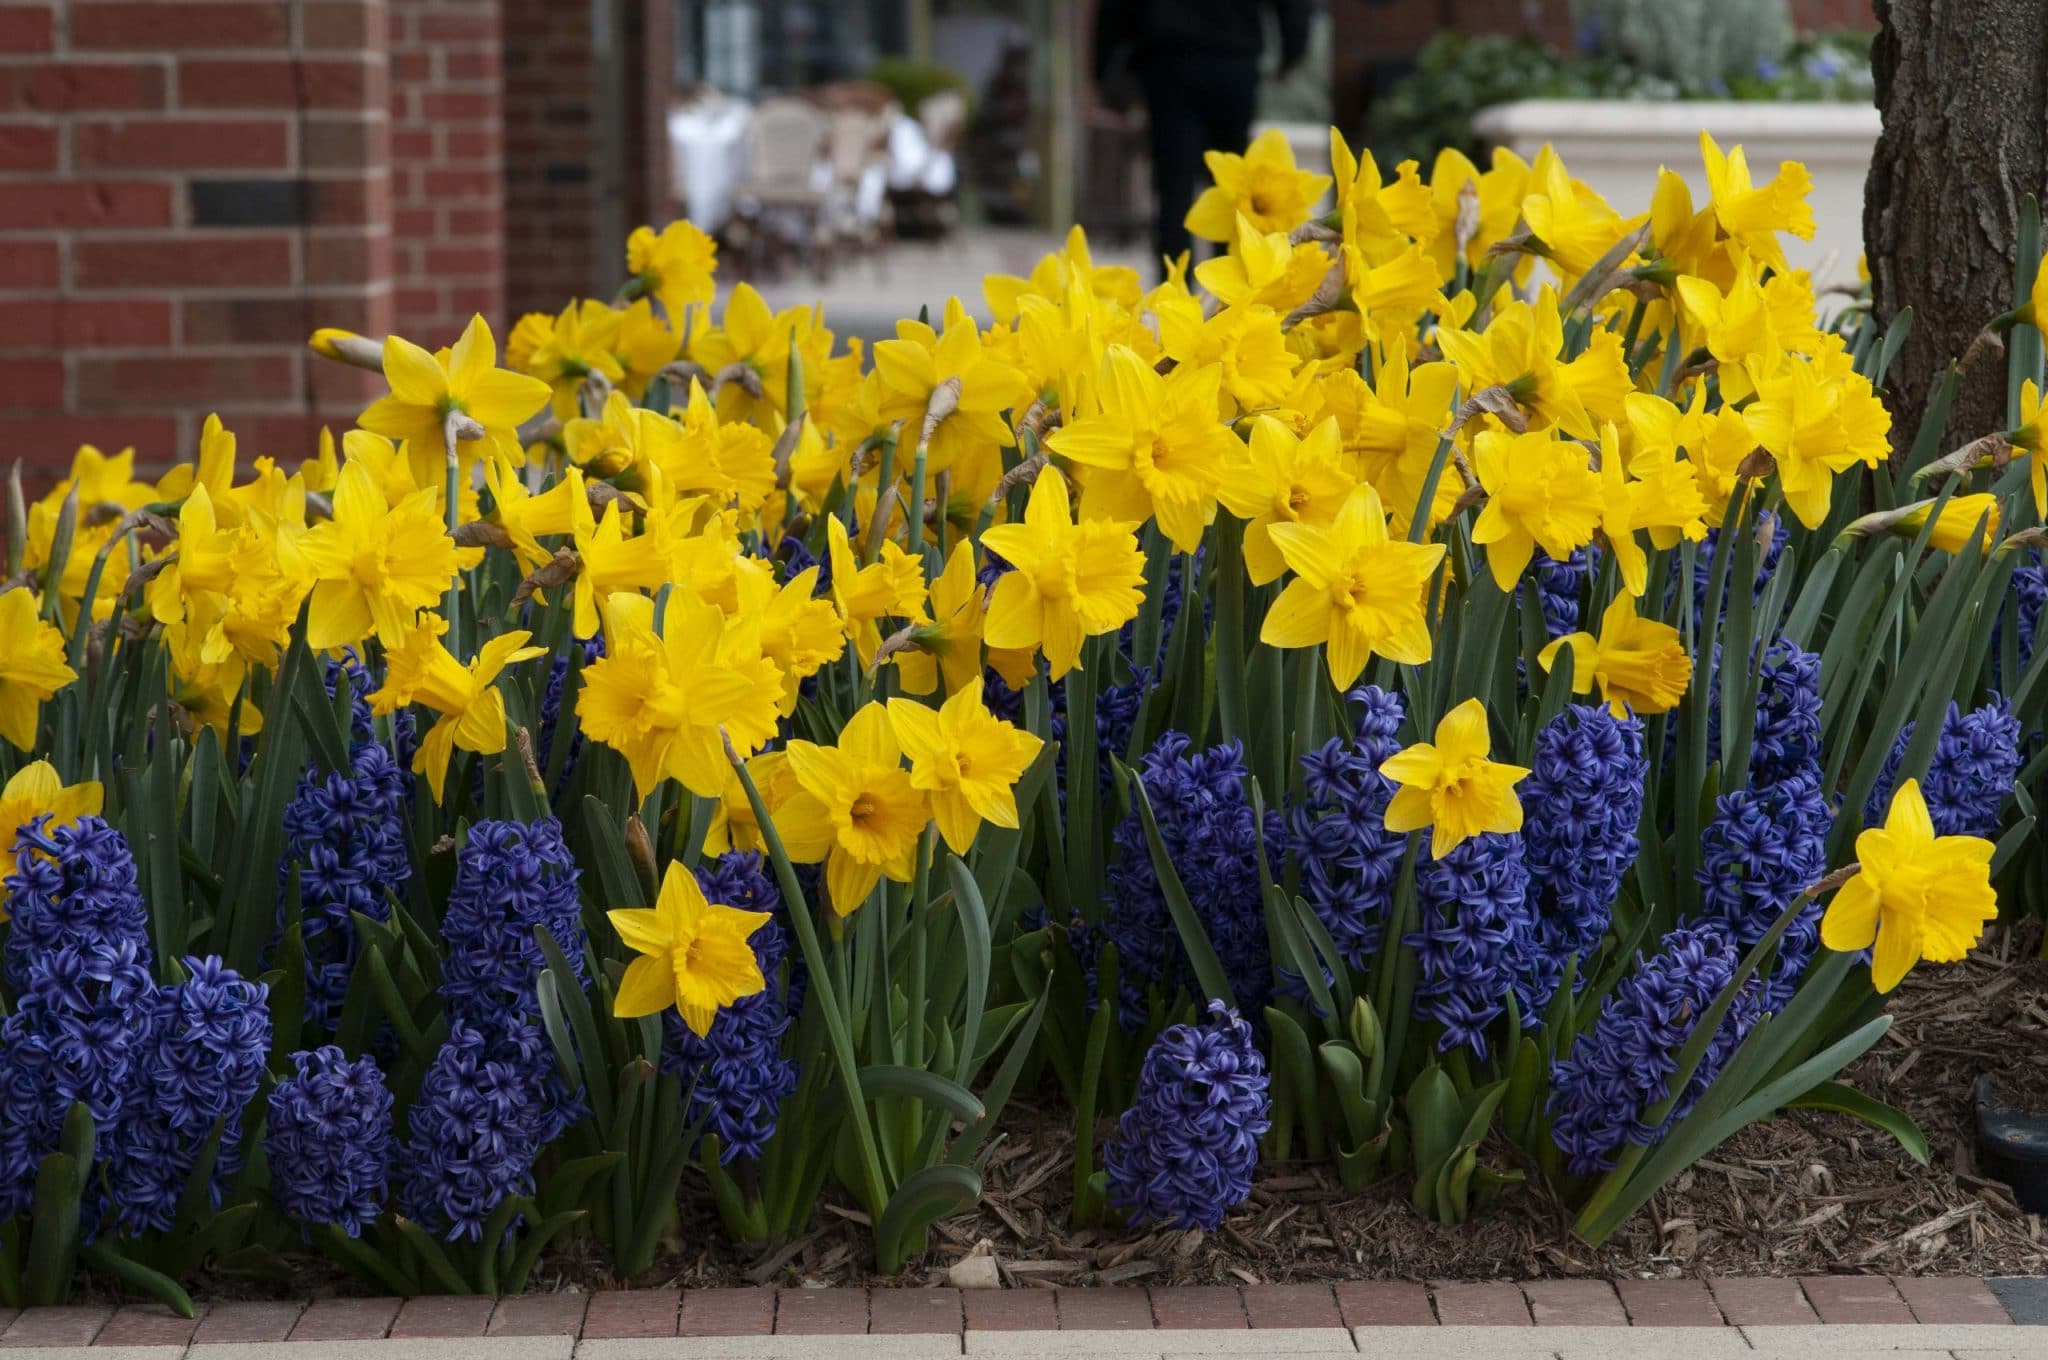 Large yellow trumpet Marieke daffodils with Hyacinth Blue Jacket from Colorblends.